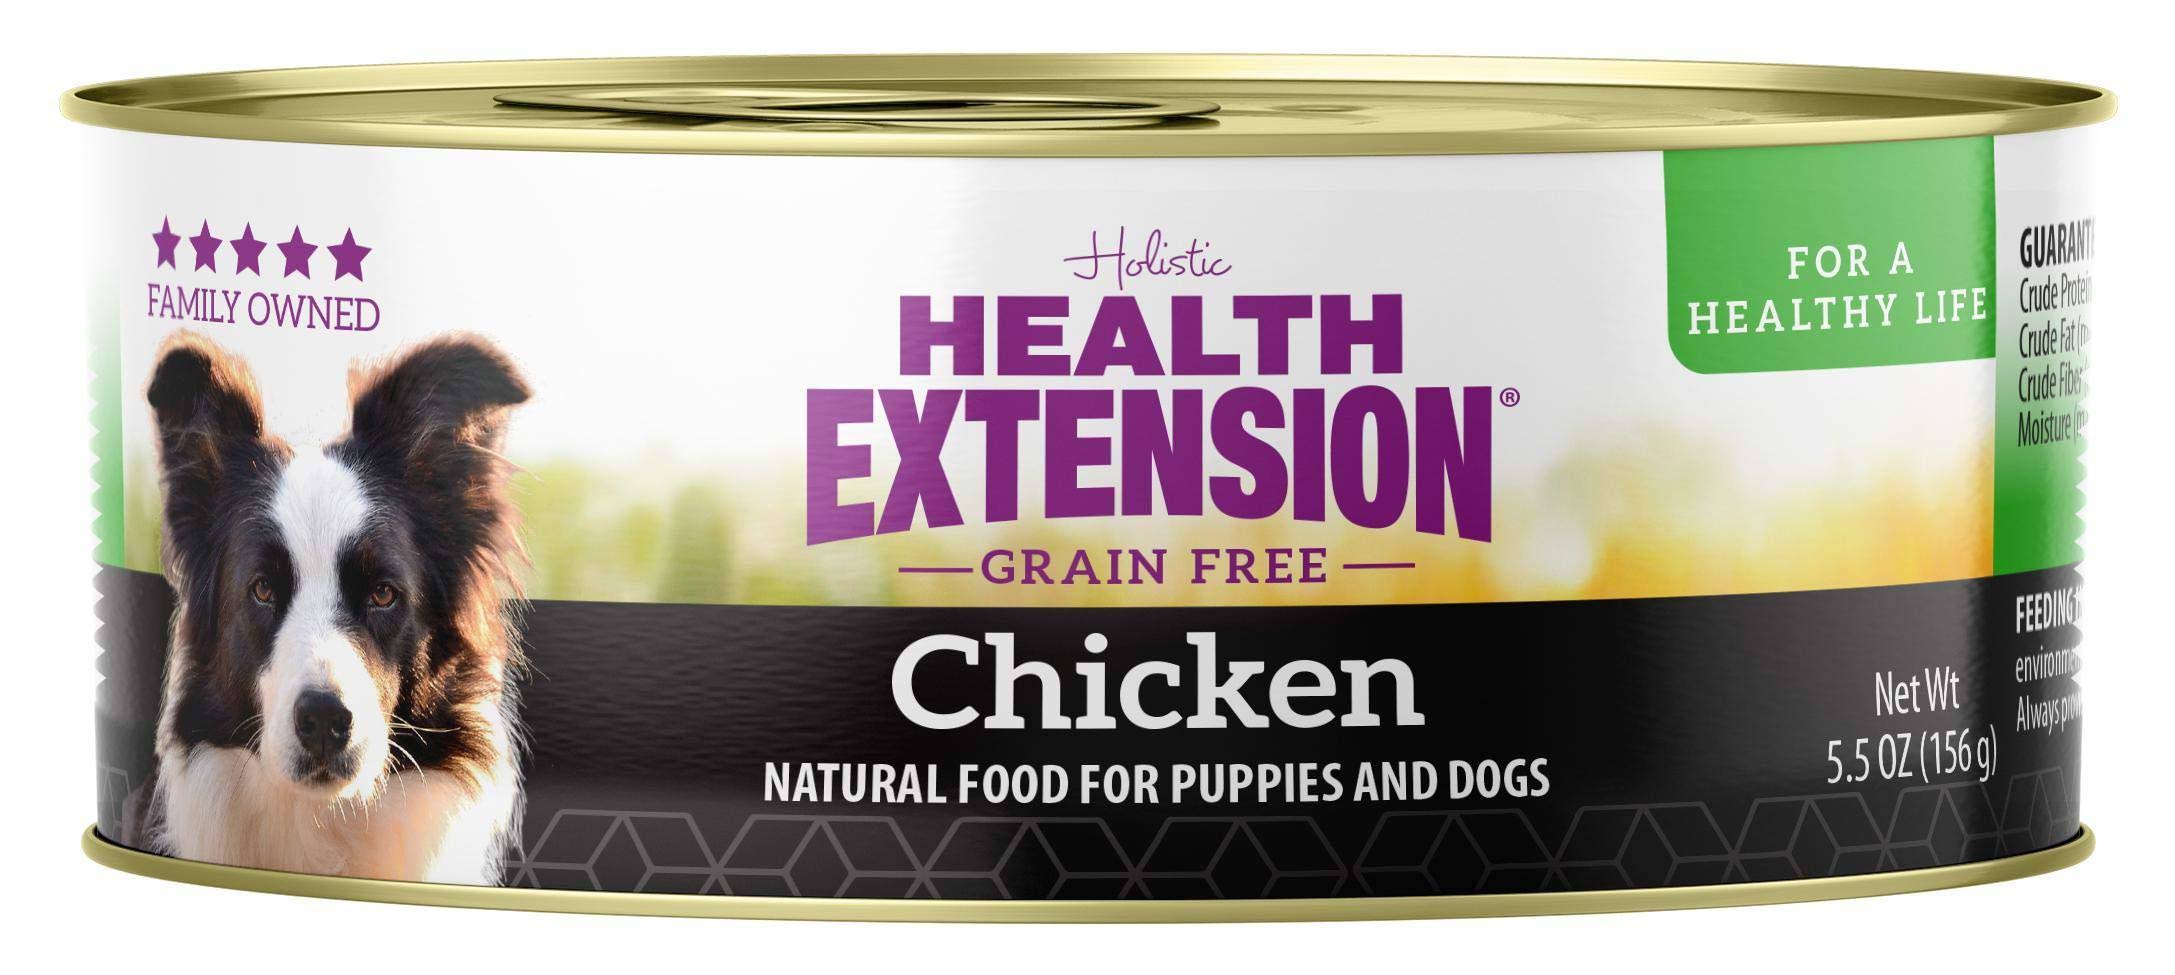 Health Extension Grain Free 95% Chicken Canned Wet Dog Food - 24 5.5 oz Cans